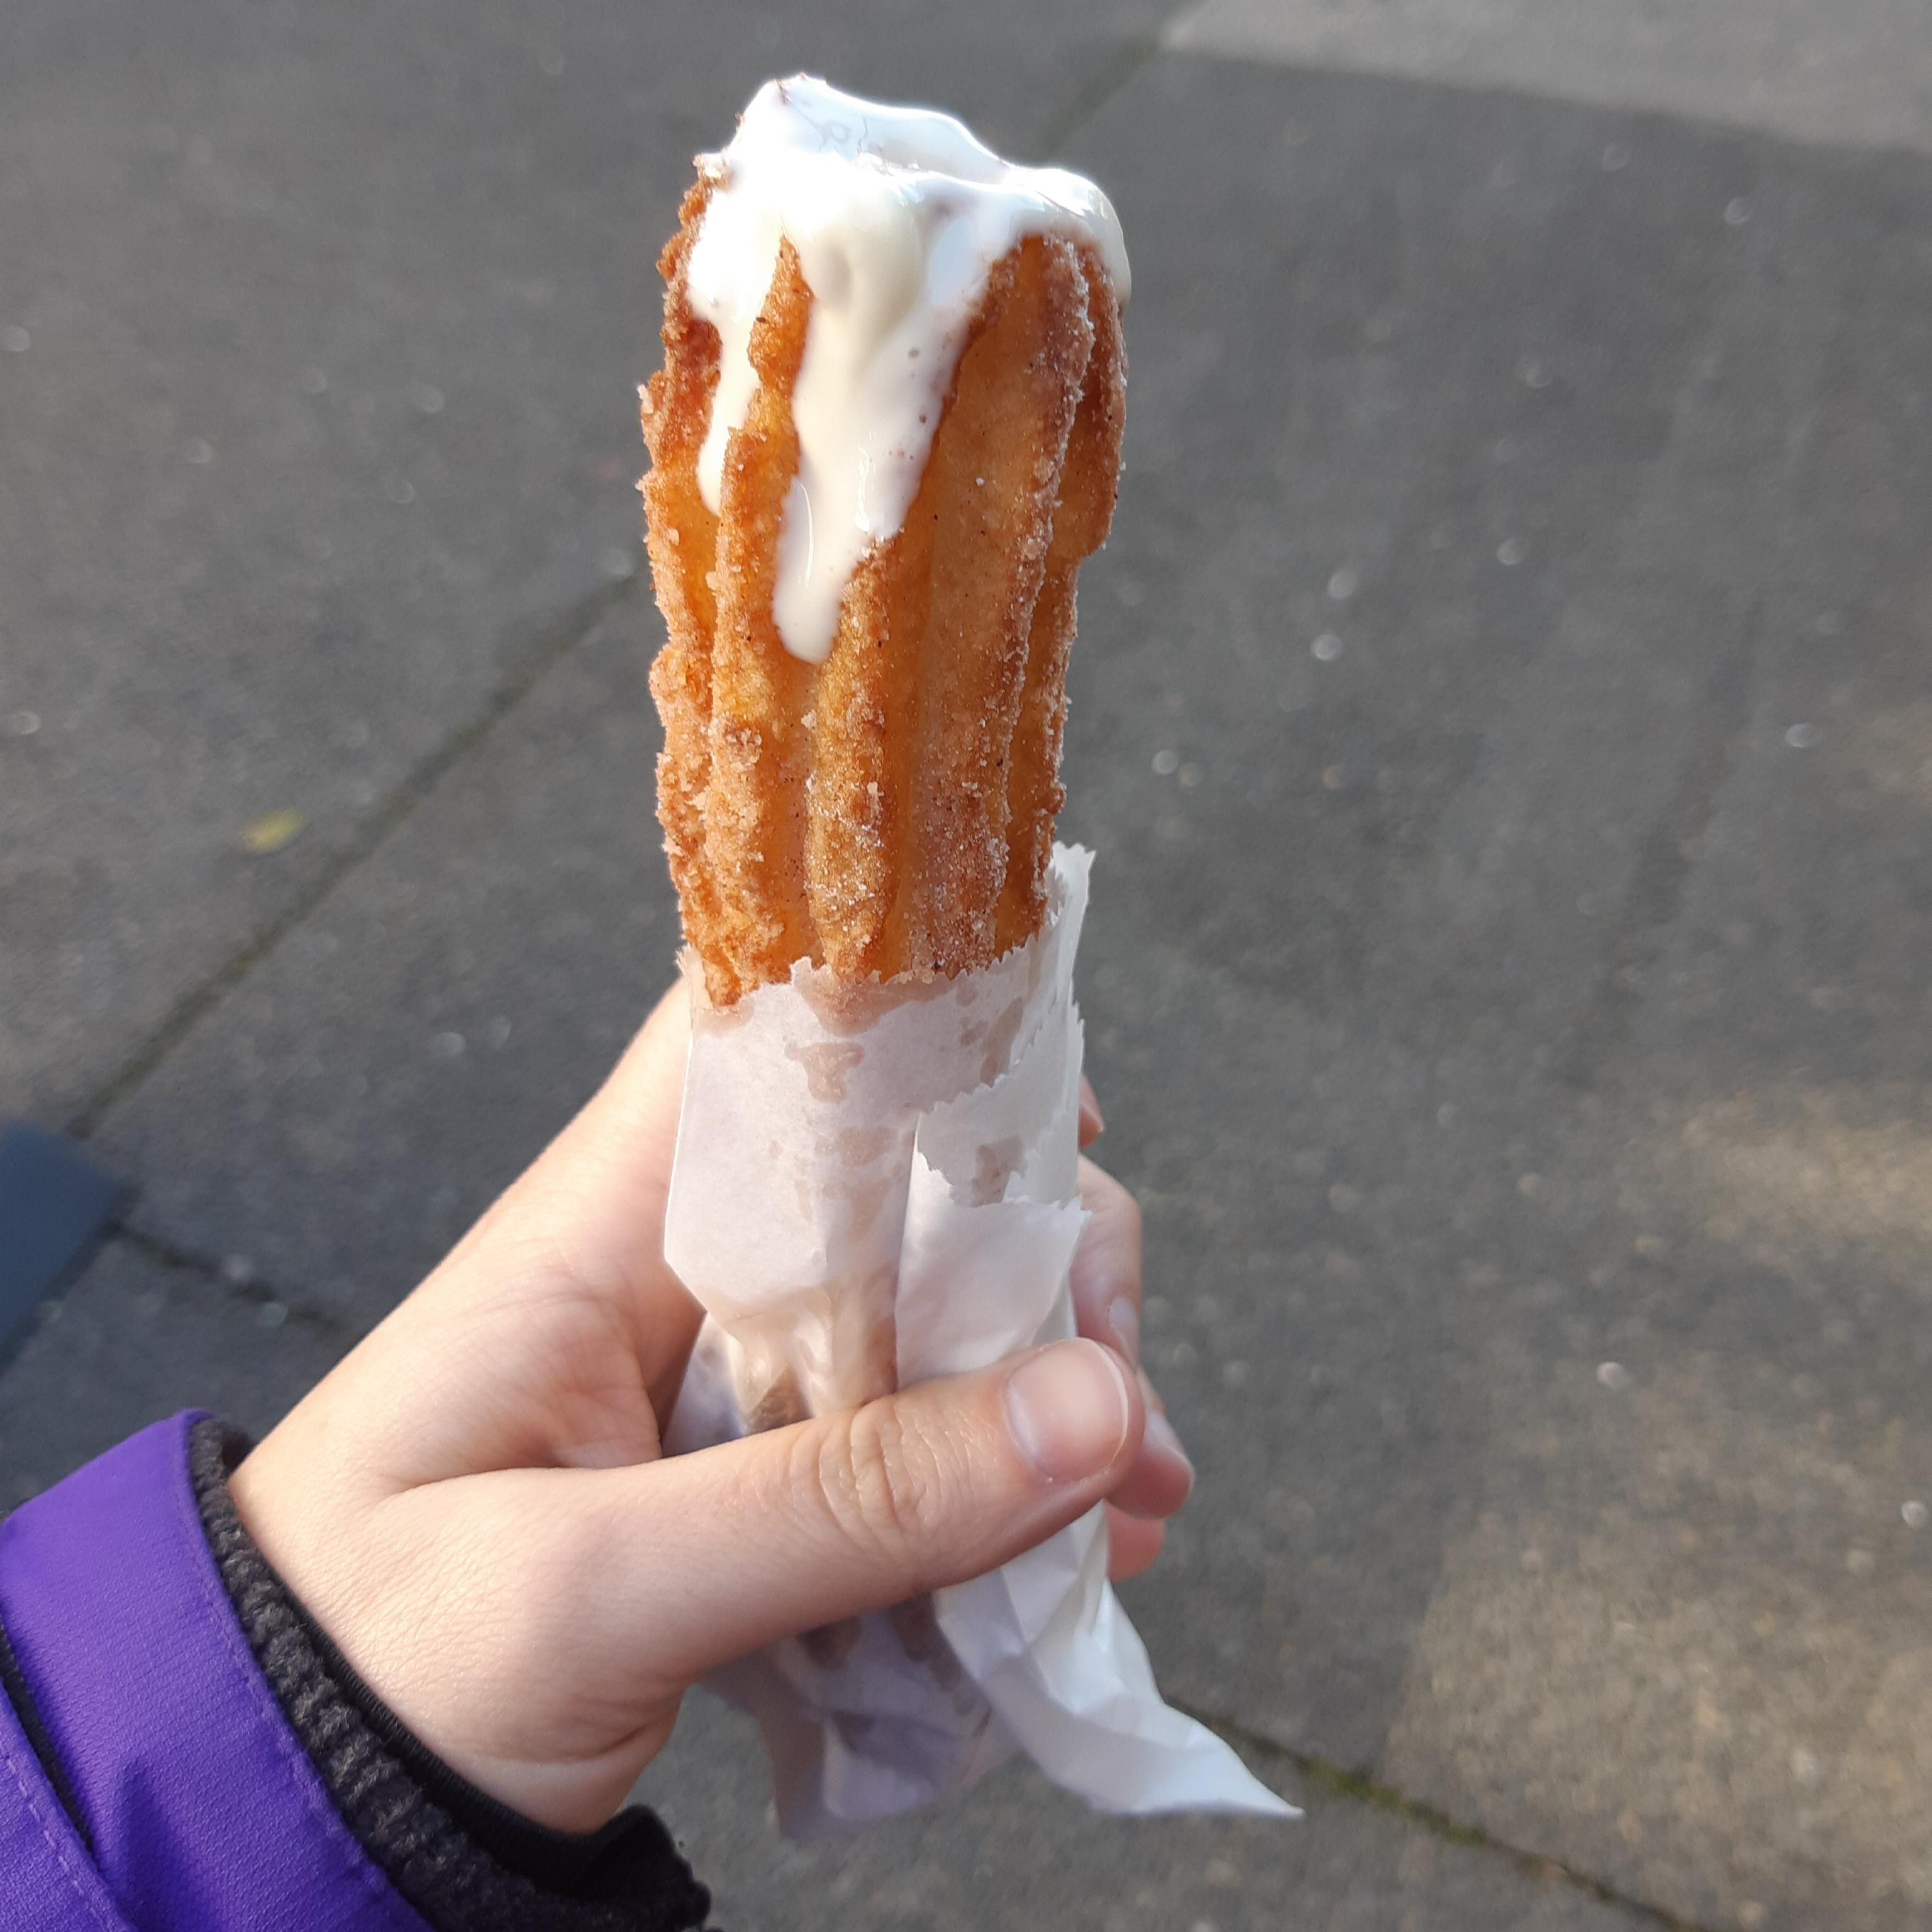 Got a Jumbo Churro with white chocolate sauce. I did not think this through...